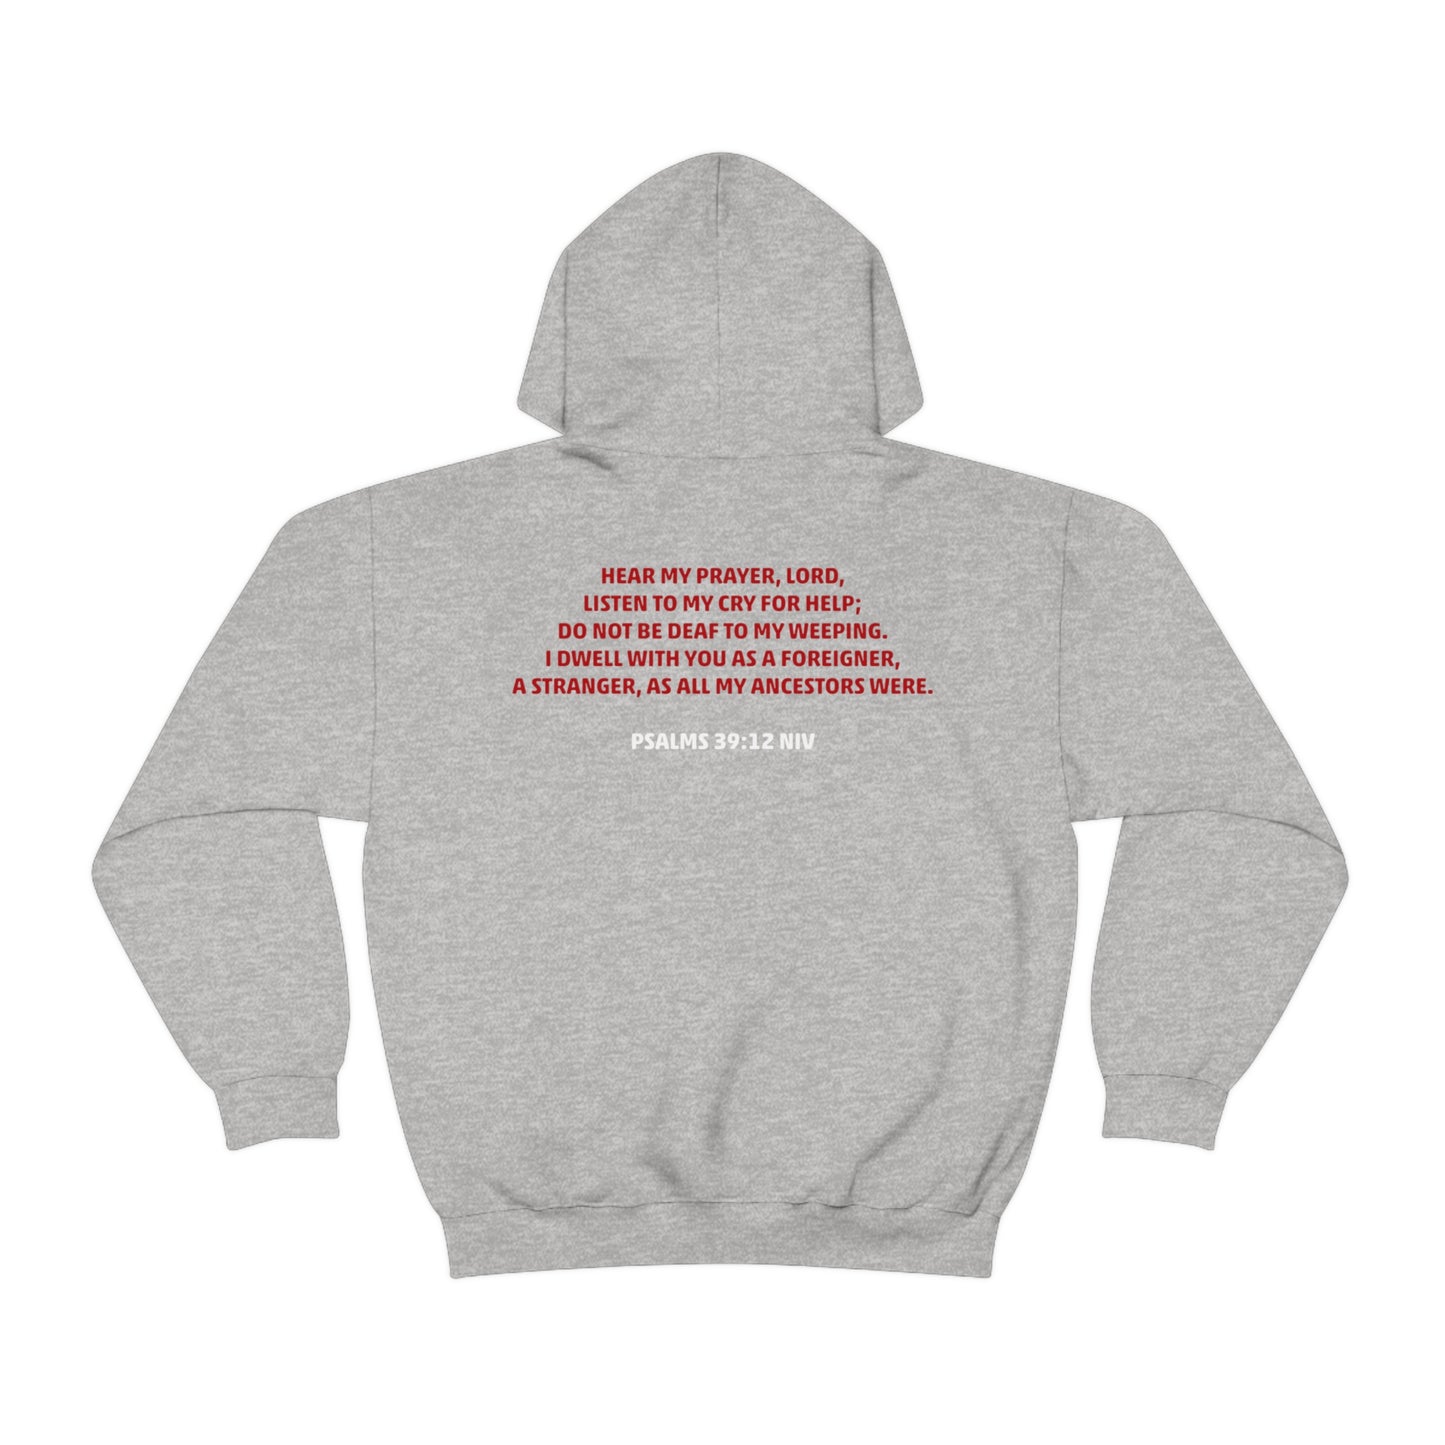 Mikelle Mason: Dwell Within Hoodie